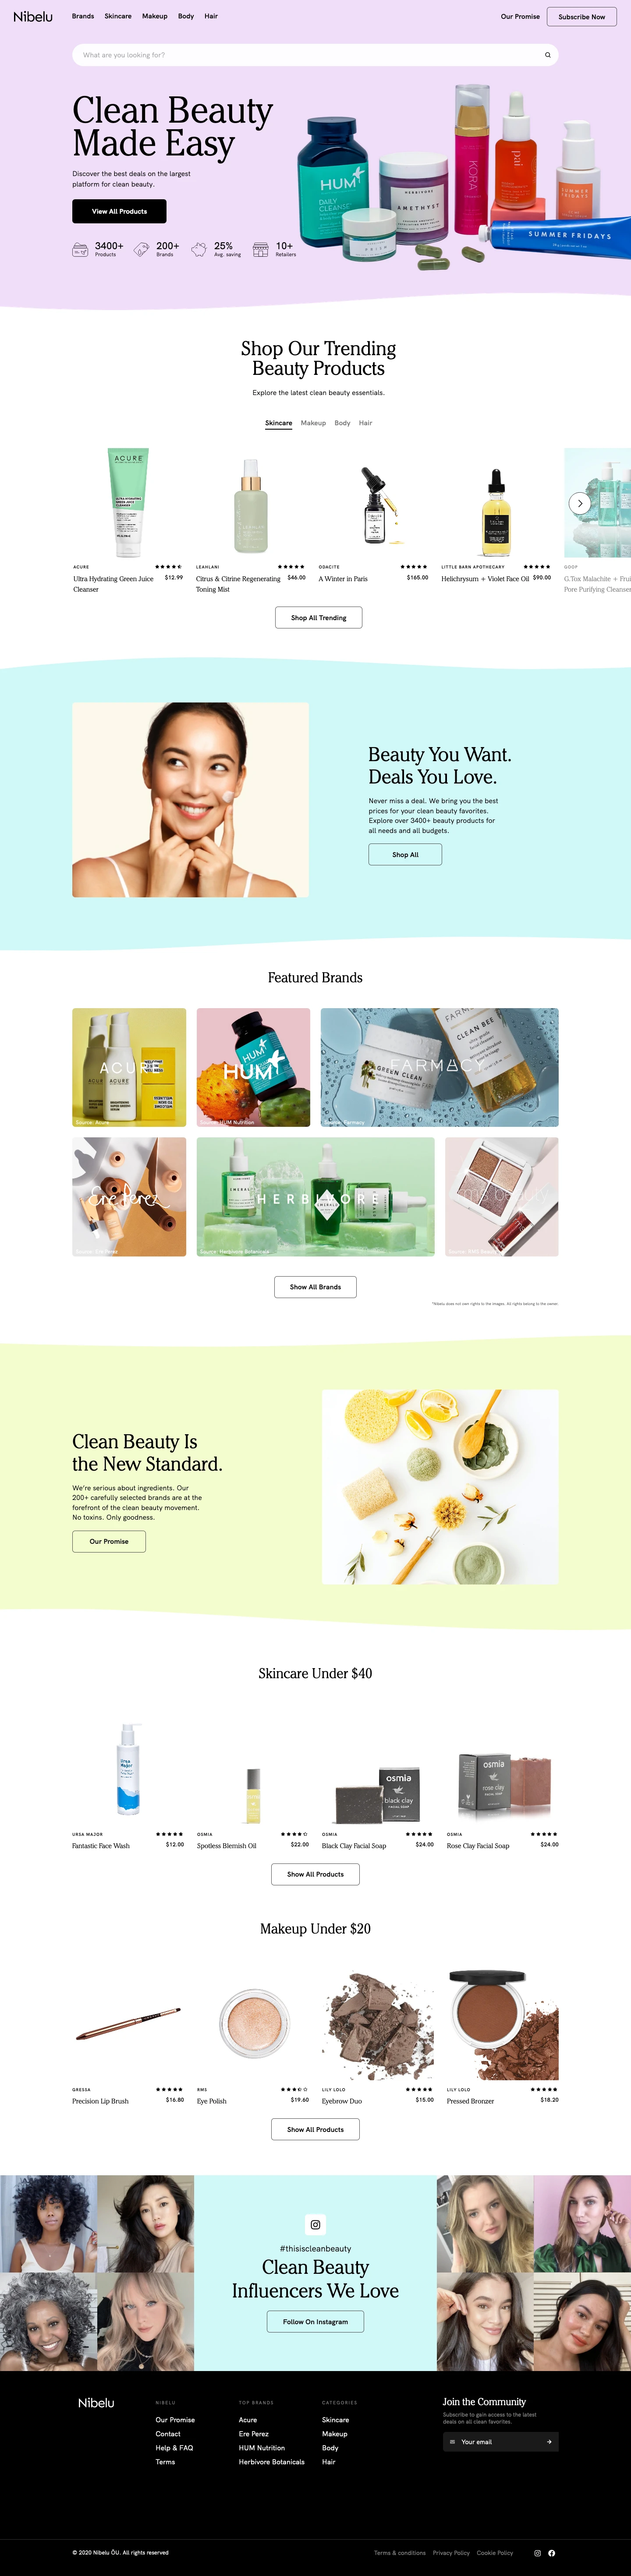 Nibelu Landing Page Example: Shop, discover and compare price of your favorite clean beauty brands all in one place.